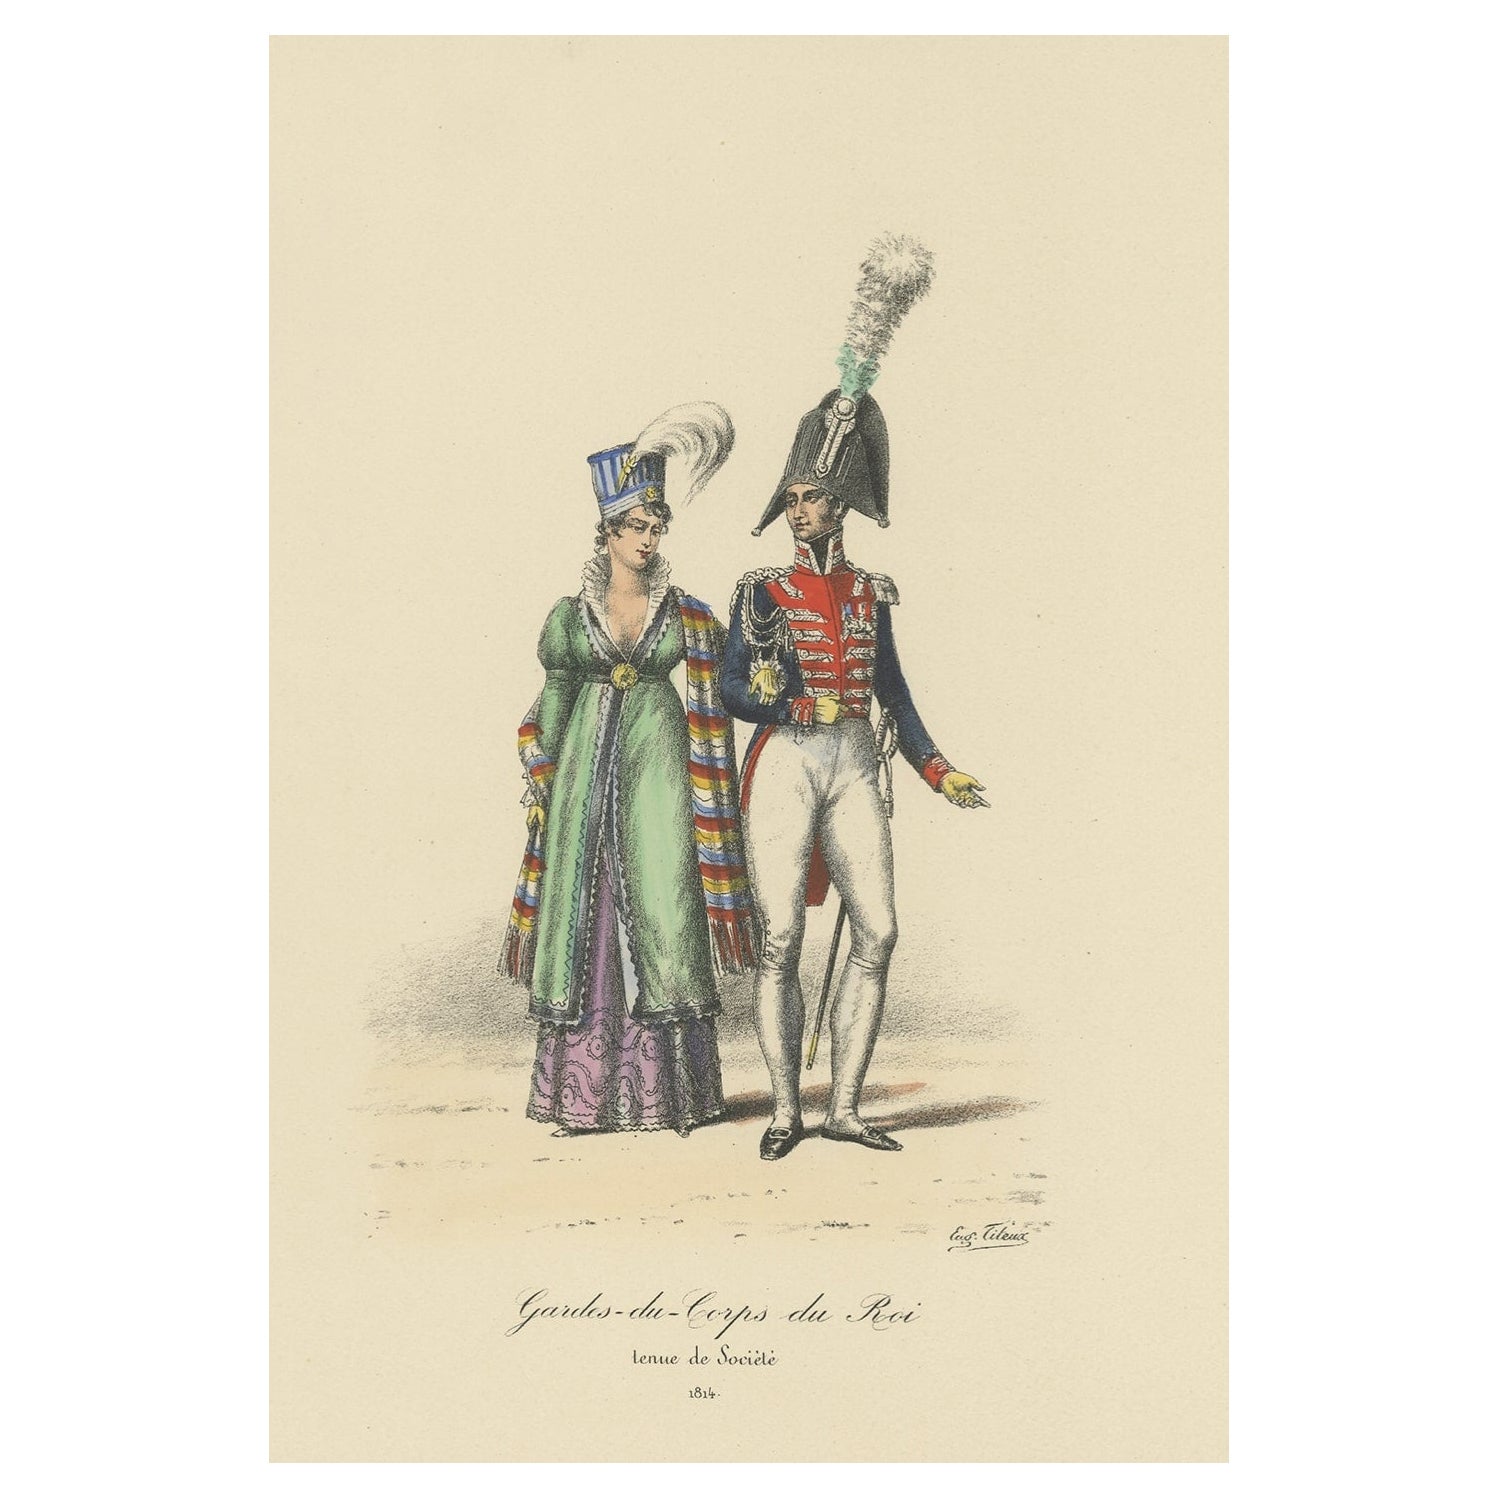 Old Hand-Colored Print of the Guards of the King of France, 1890